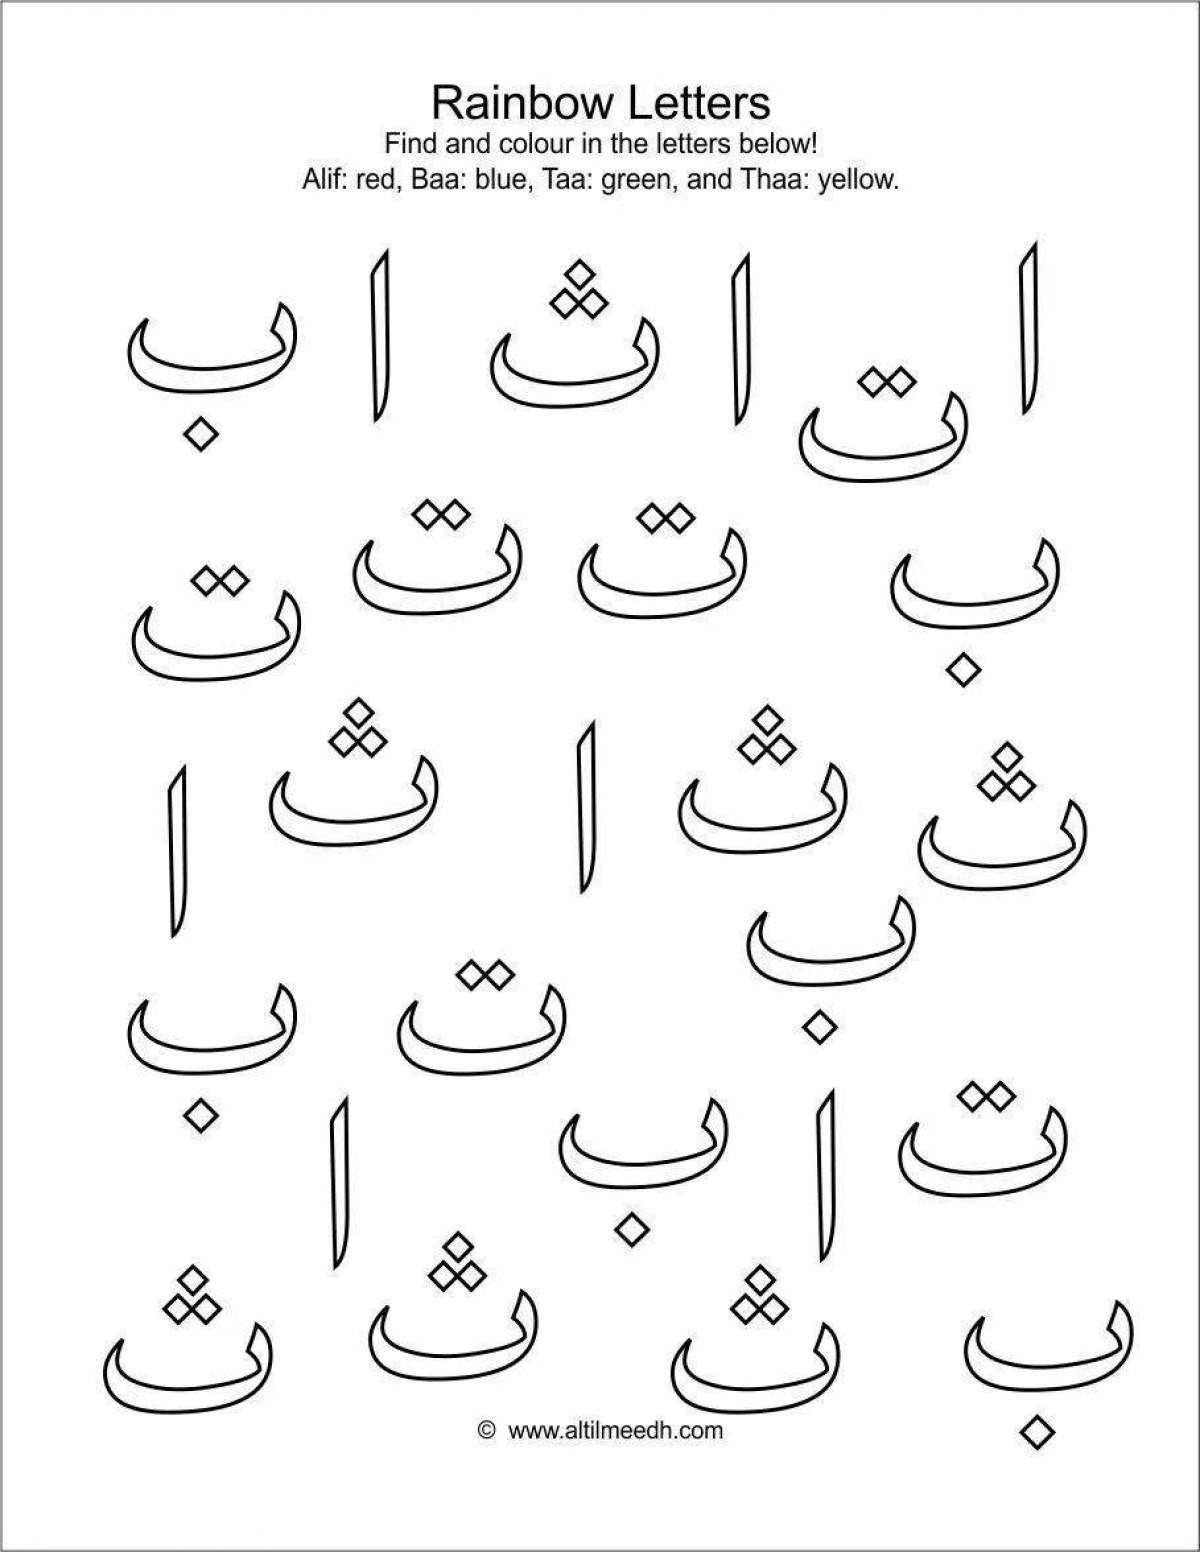 A colorful Arabic alphabet coloring page for kids of all backgrounds